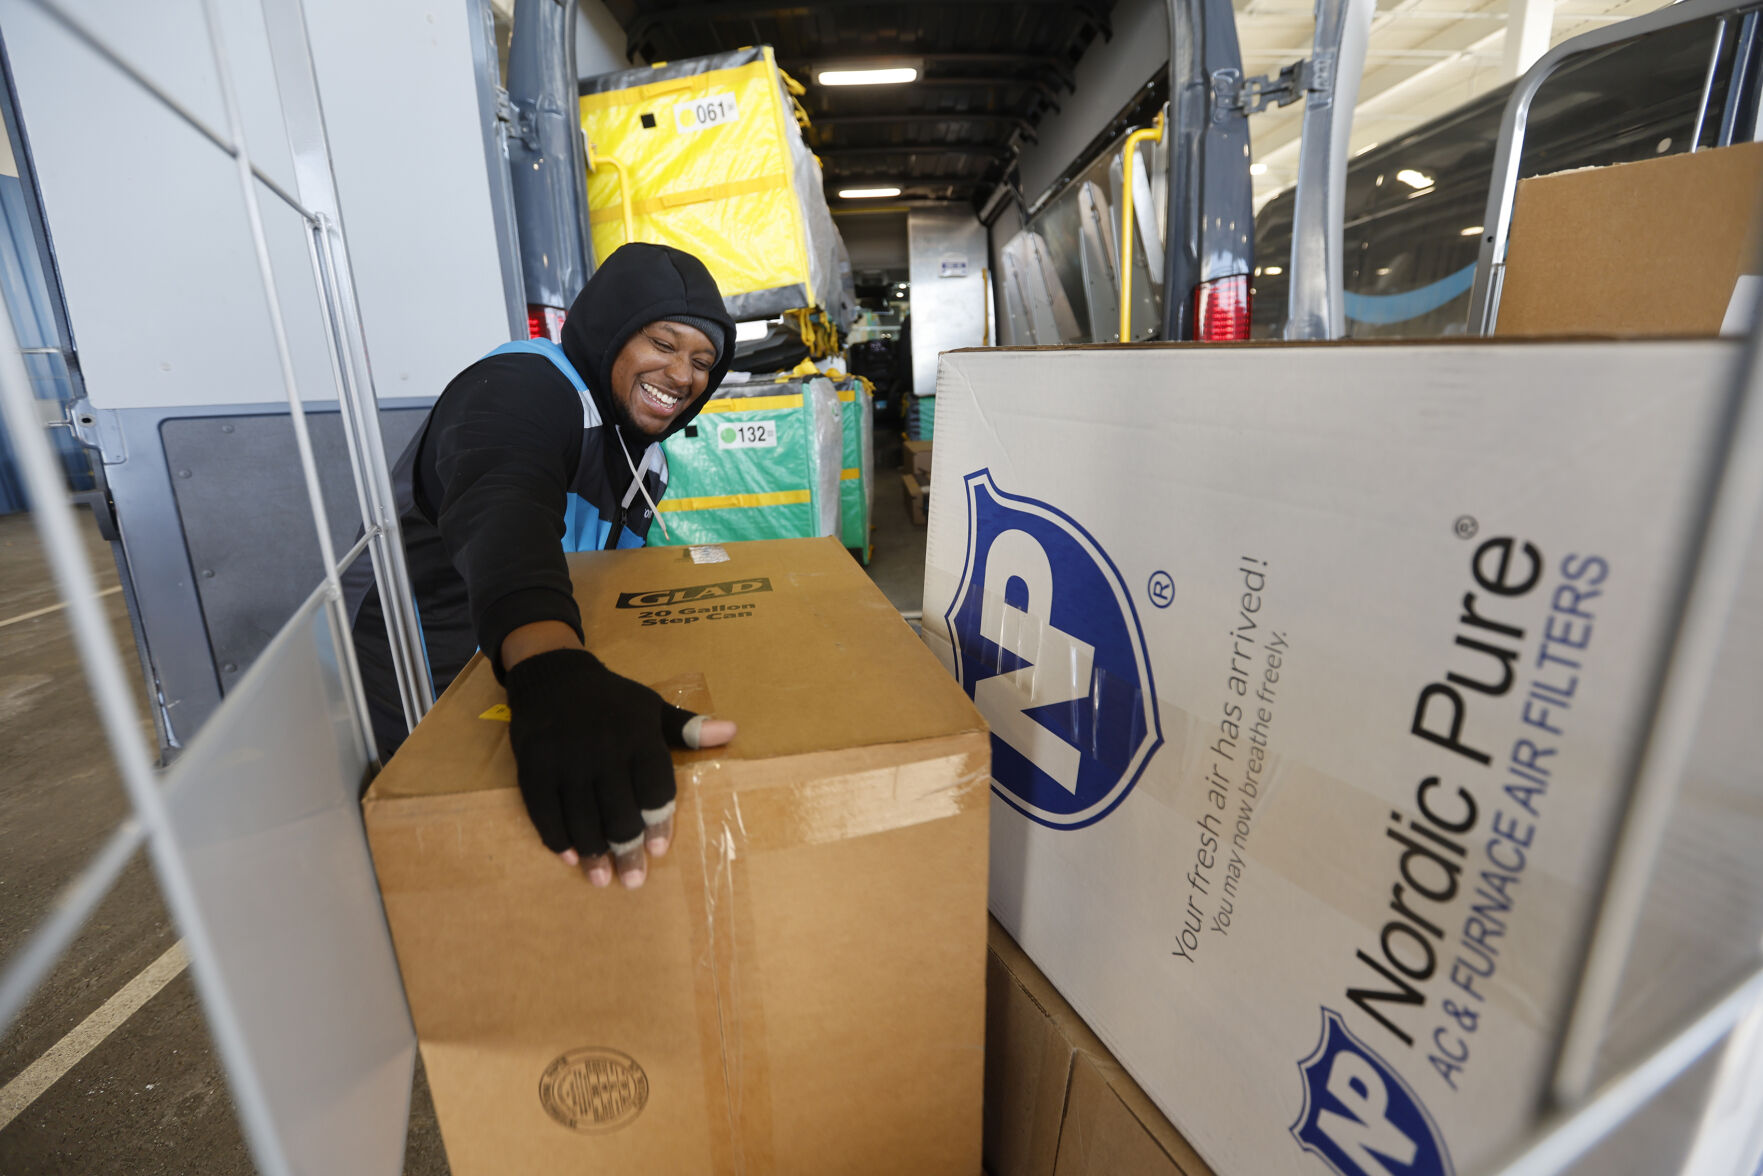 Frederick Overton loads packages into vehicles at Amazon in Dubuque on Tuesday, Feb. 21, 2023.    PHOTO CREDIT: JESSICA REILLY